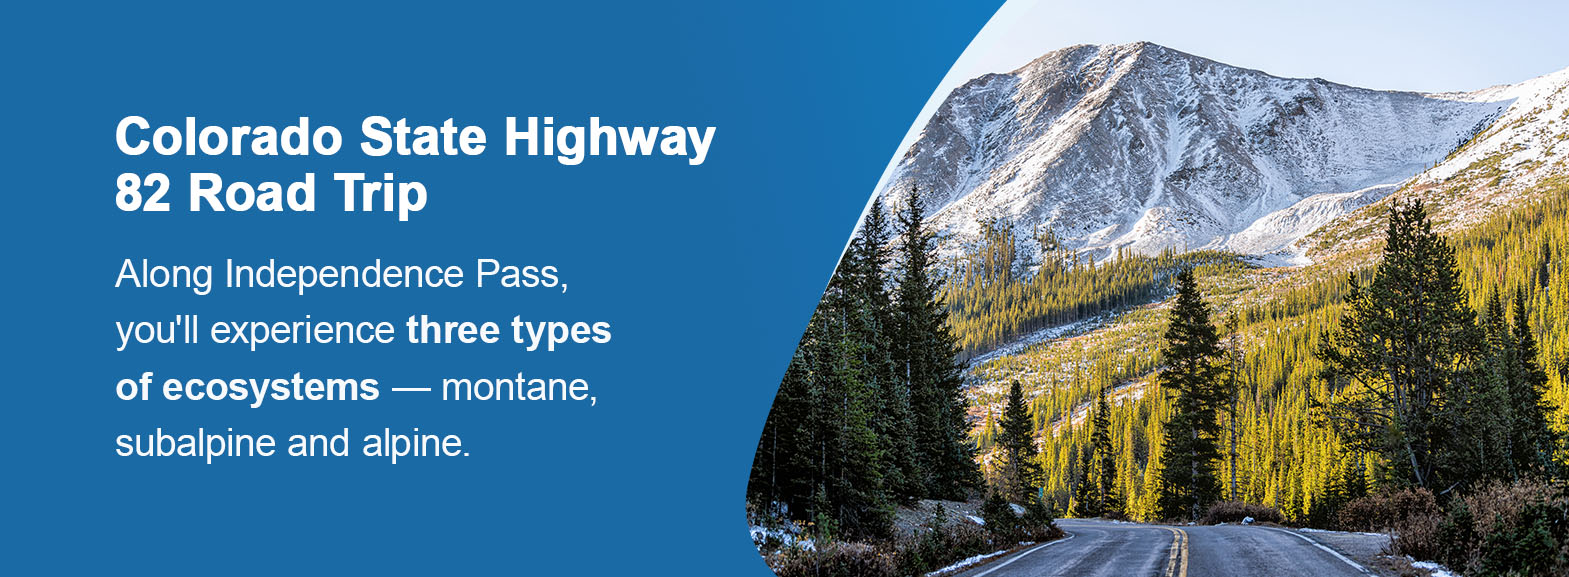 Colorado State Highway 82 Road Trip. Along Independence Pass, you'll experience three types of ecosystems — montane, subalpine and alpine.